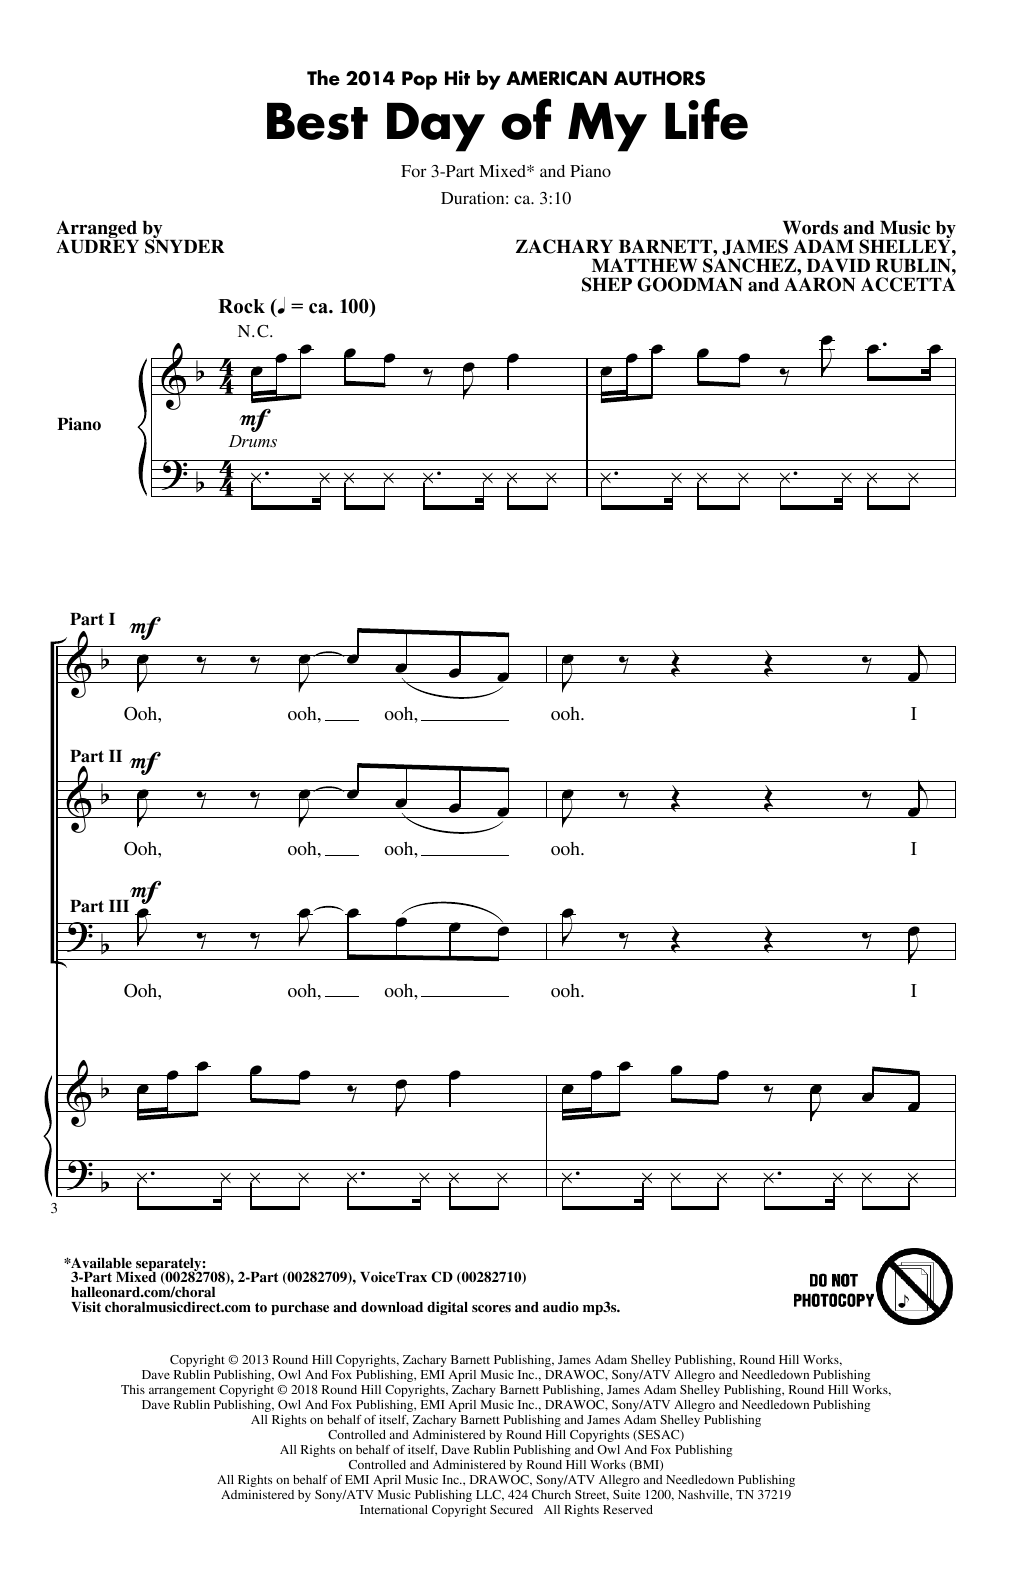 Download American Authors Best Day Of My Life (Arr. Audrey Snyder Sheet Music